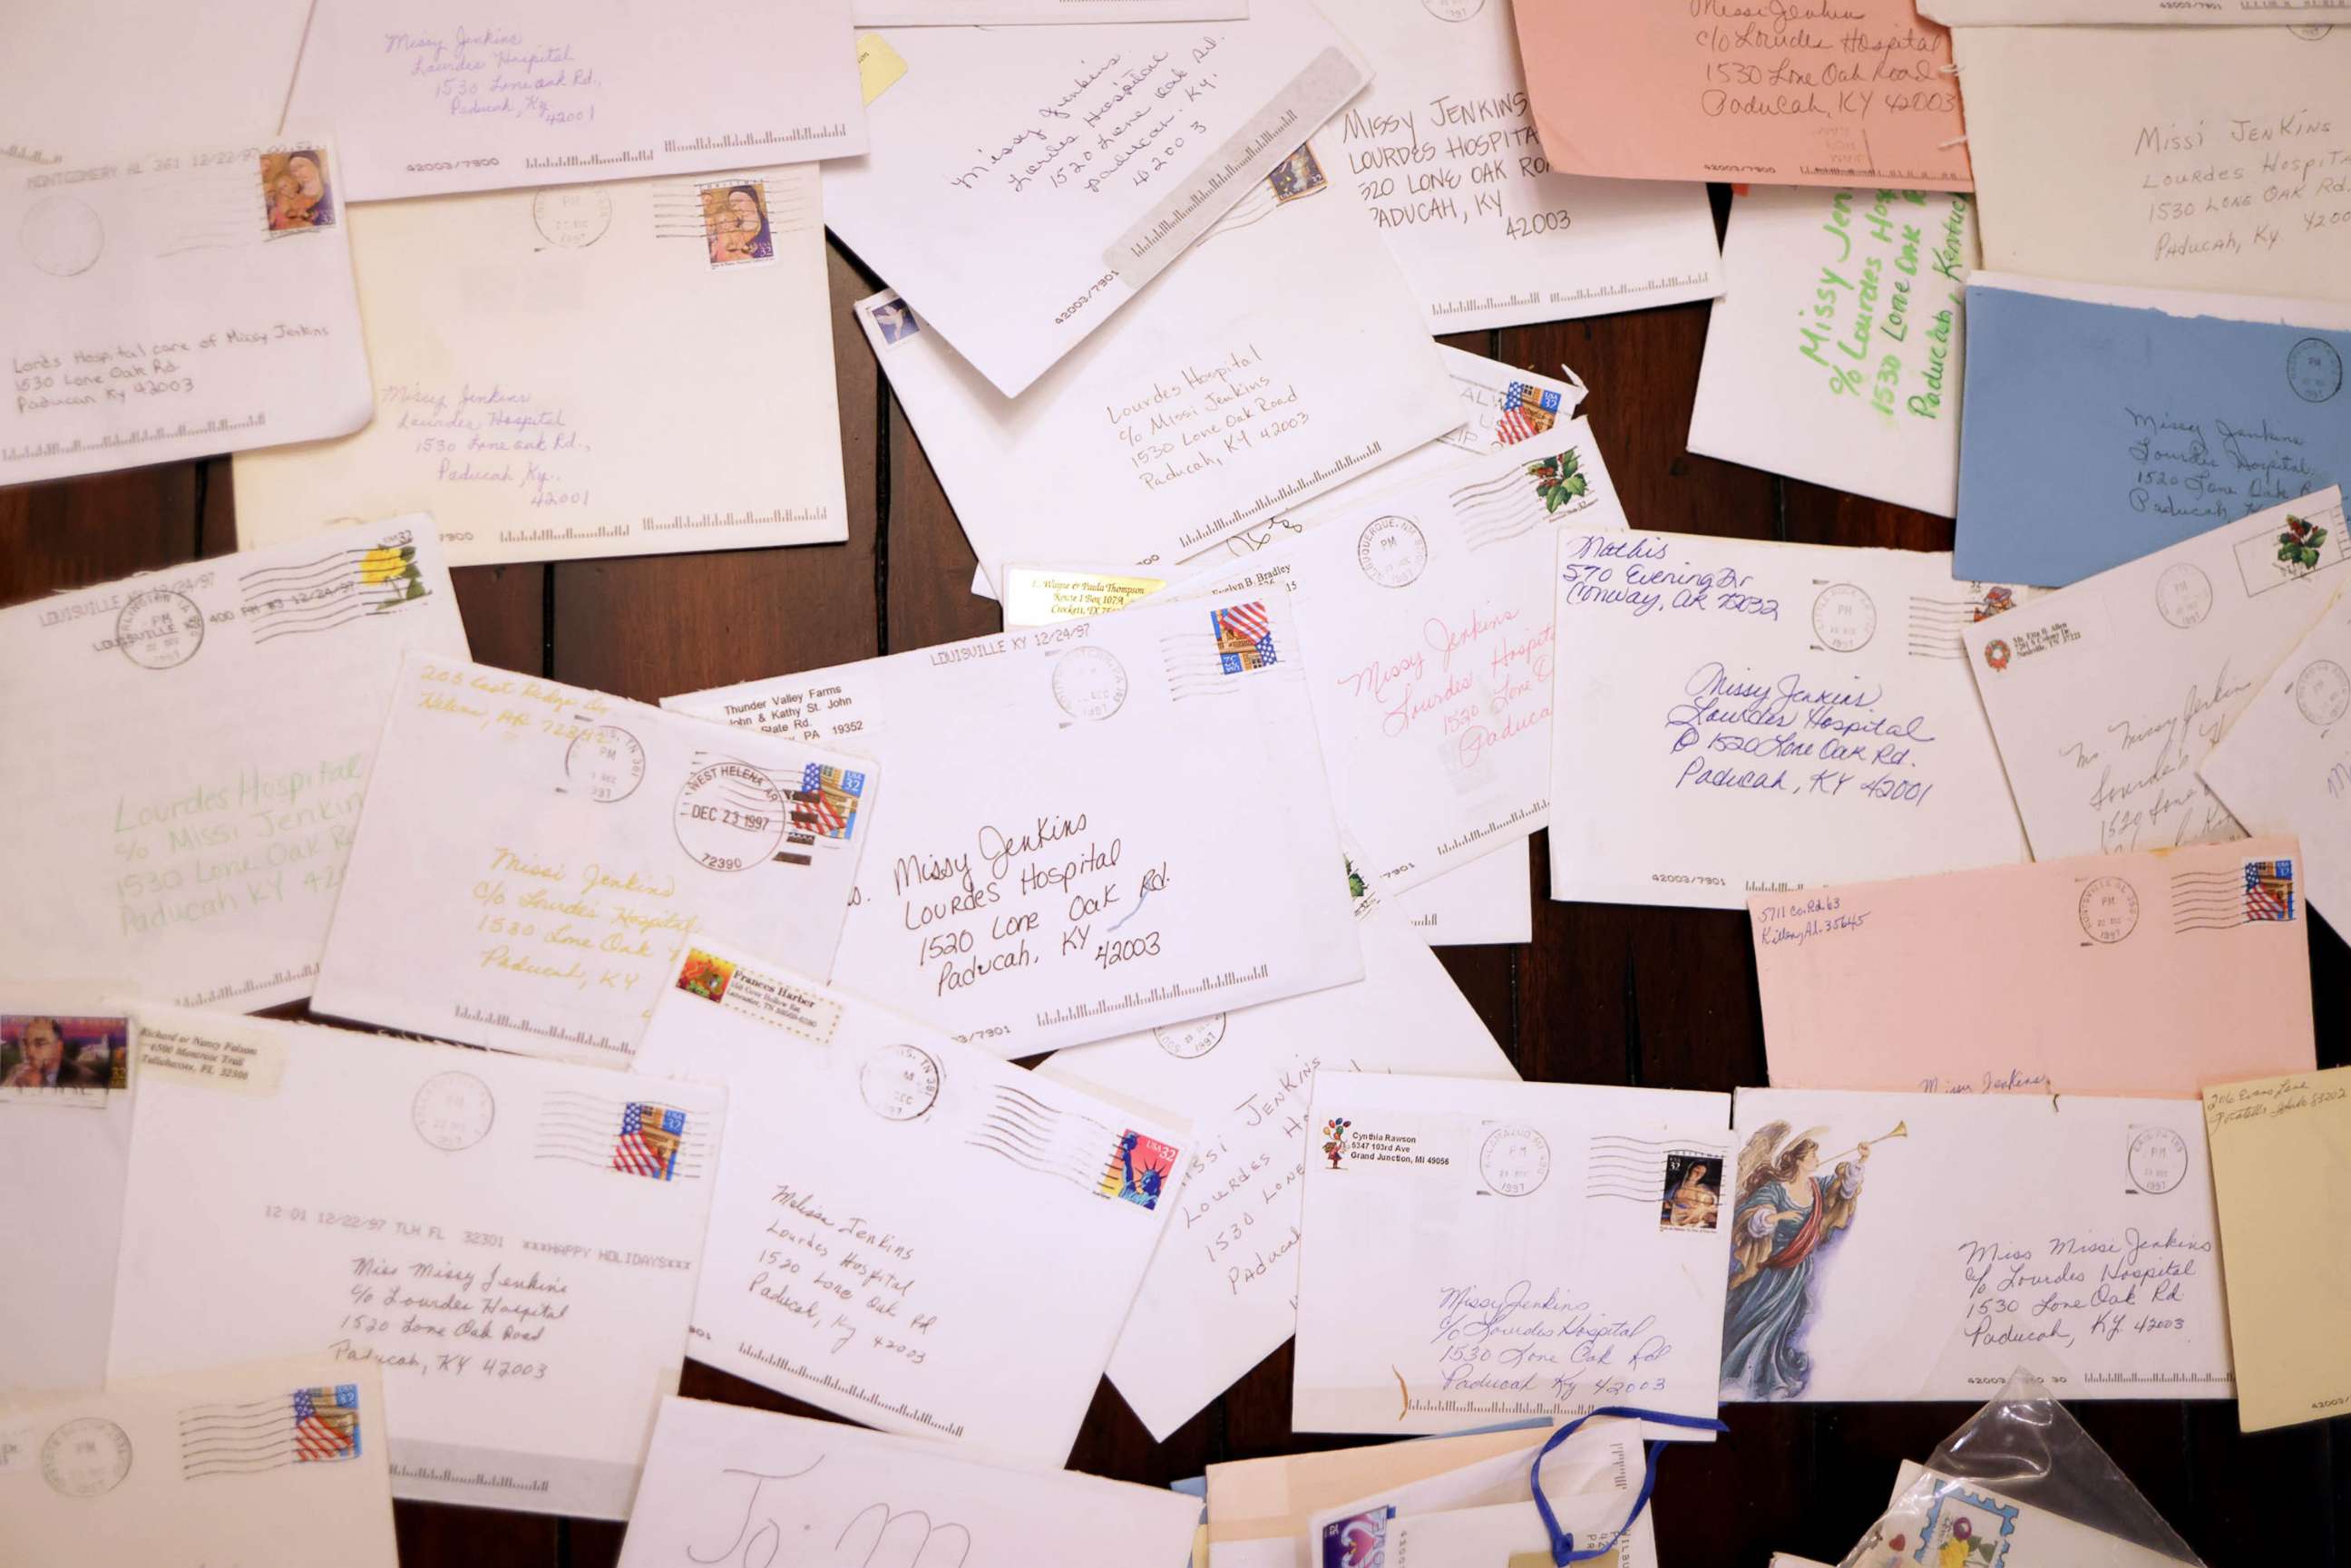 PHOTO: Missy Jenkins Smith says she received thousands of letters after being injured in a 1997 shooting at Heath High School in Paducah, Kentucky.